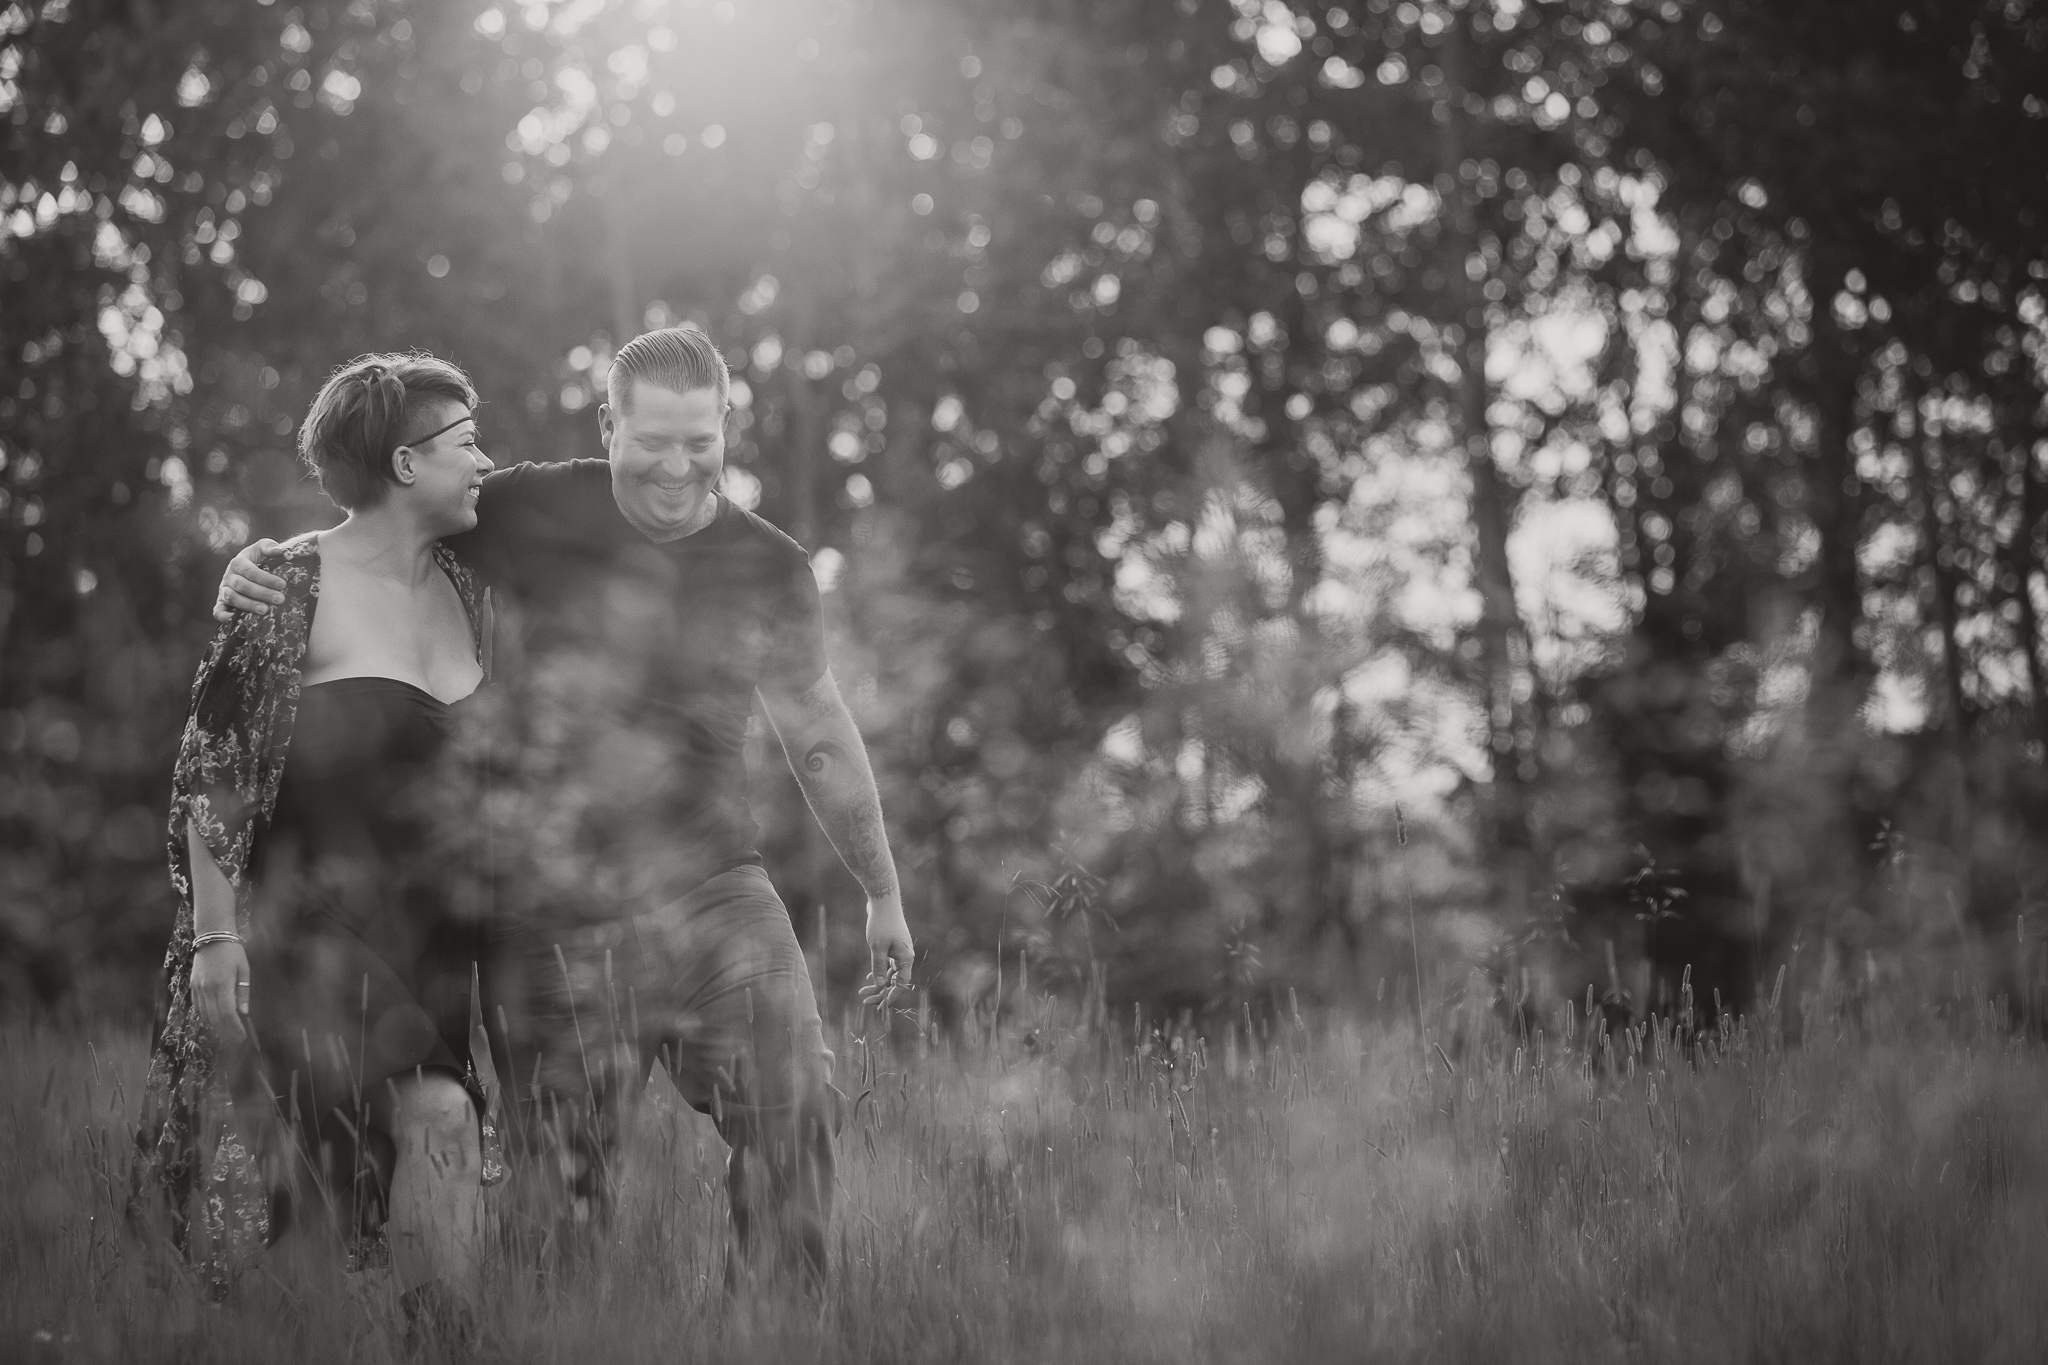 man with are around woman walking through tall grass black and white